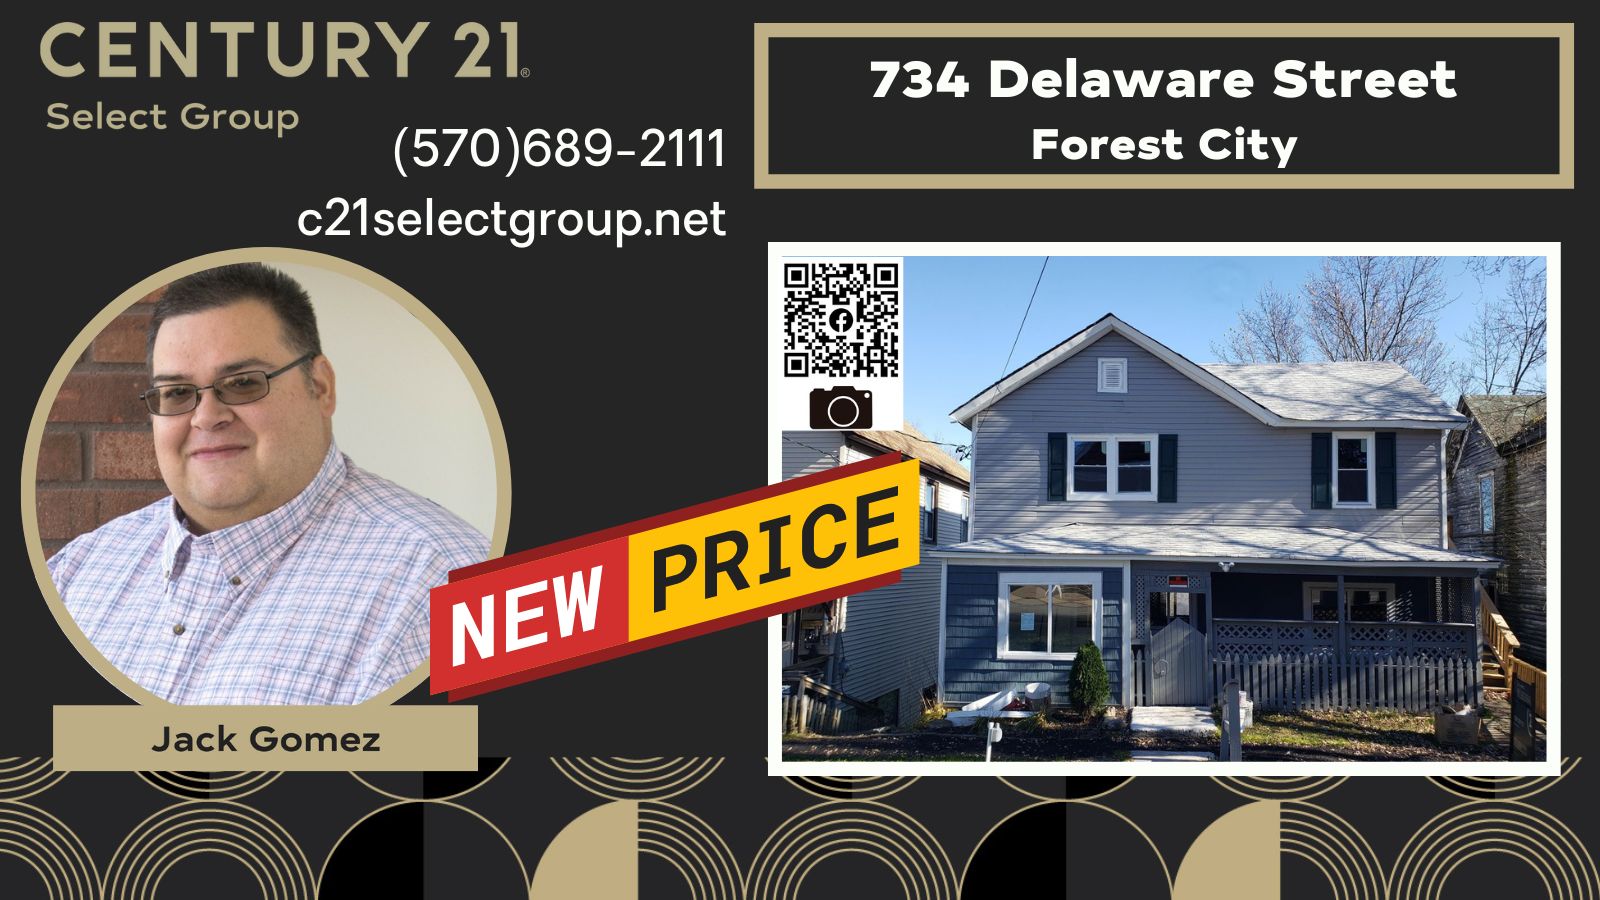 NEW PRICE! 734 Delaware Street: Newly Restored Multi-Unit Home in Forest City